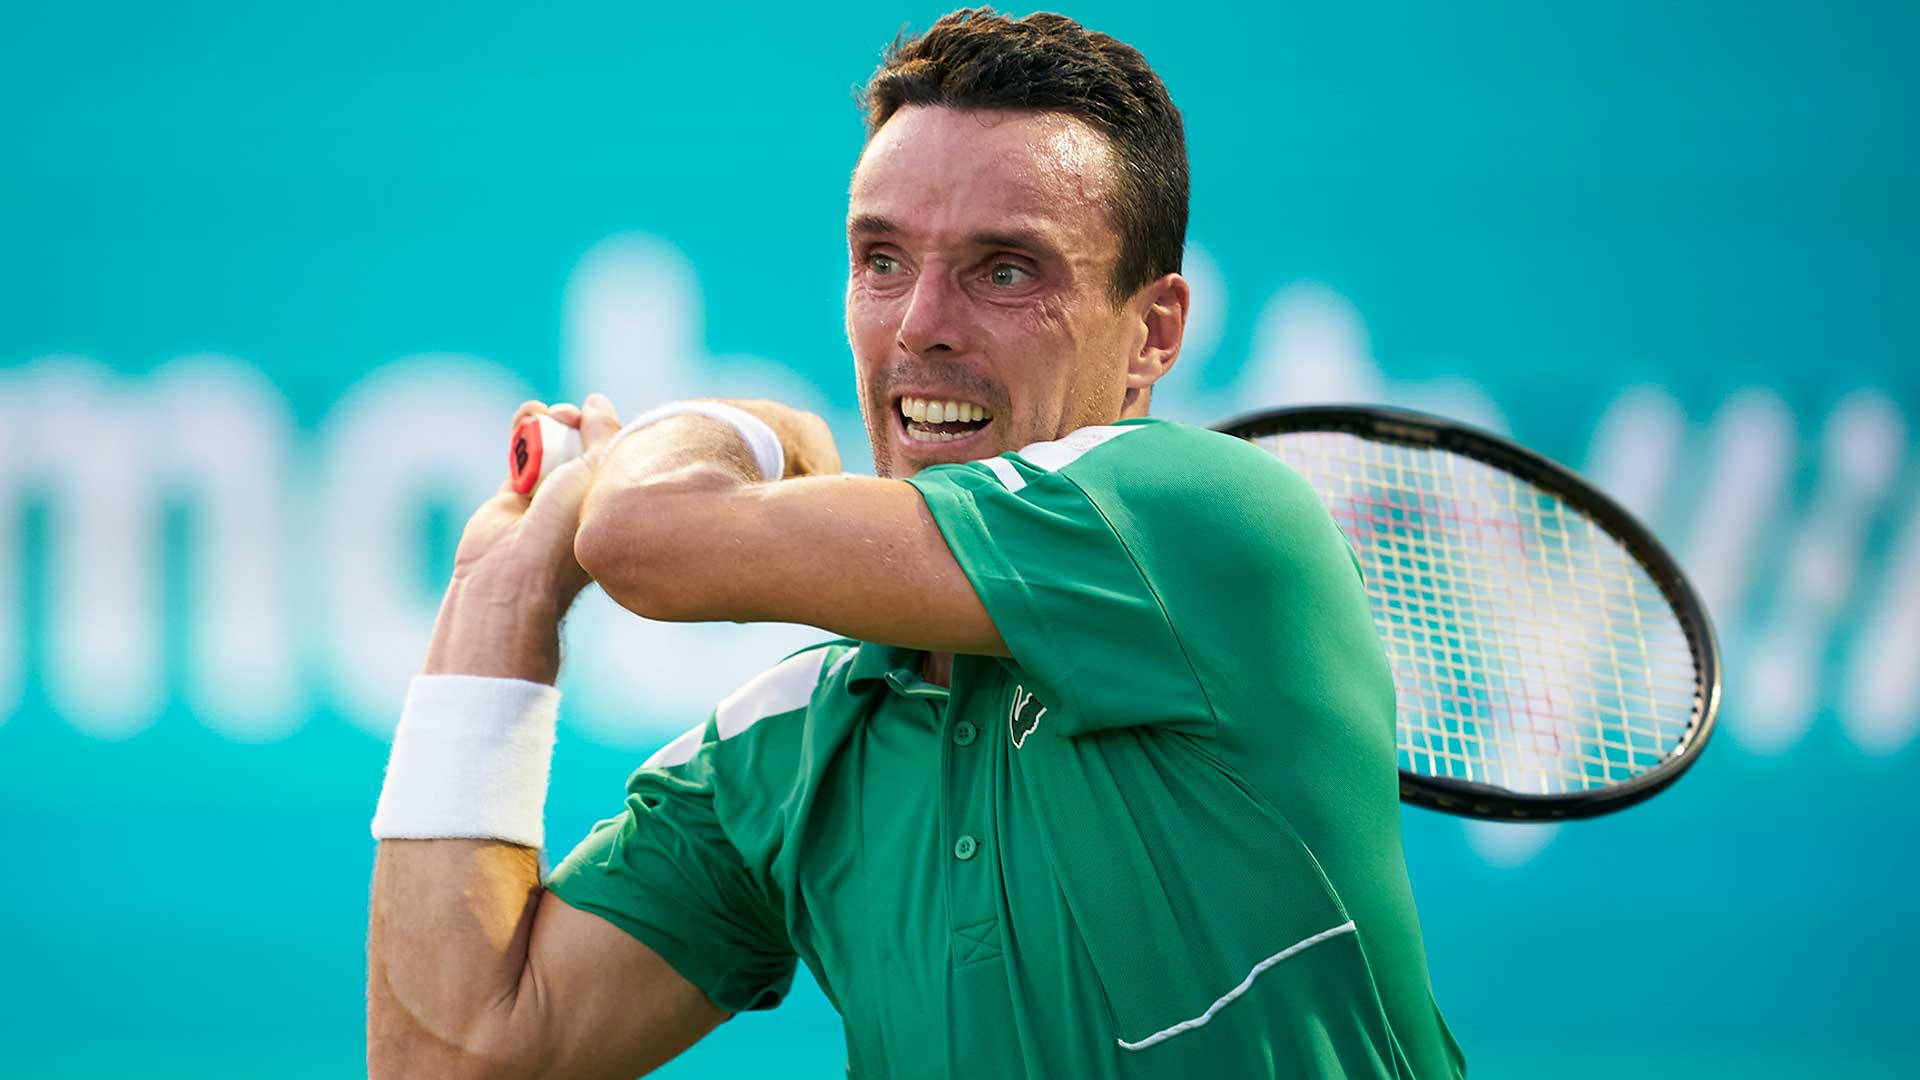 Robertobautista Agut - Gripande Racket - (this Could Be The Caption For The Wallpaper Featuring A Close-up Of Roberto Bautista Agut's Tennis Racket). Wallpaper